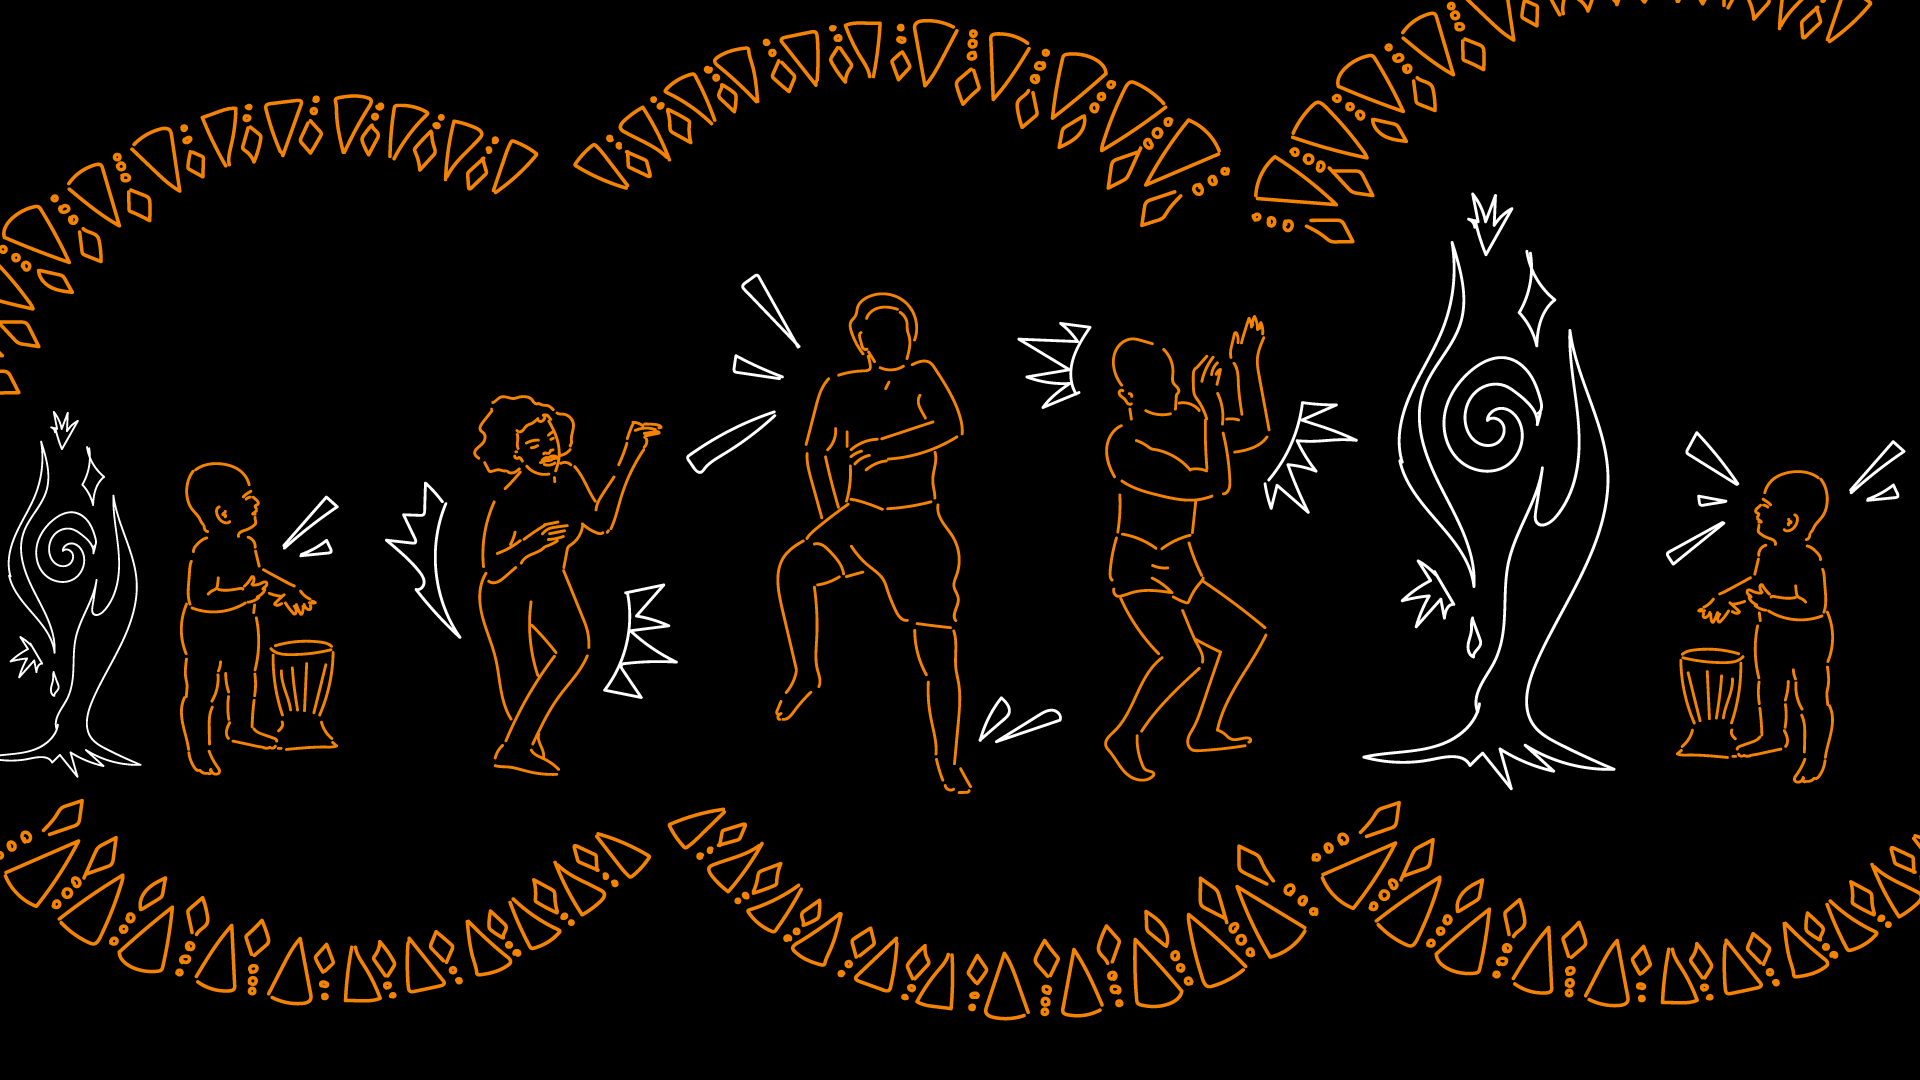 Illustration in white and orange on a black background showing the stages of dancing through life